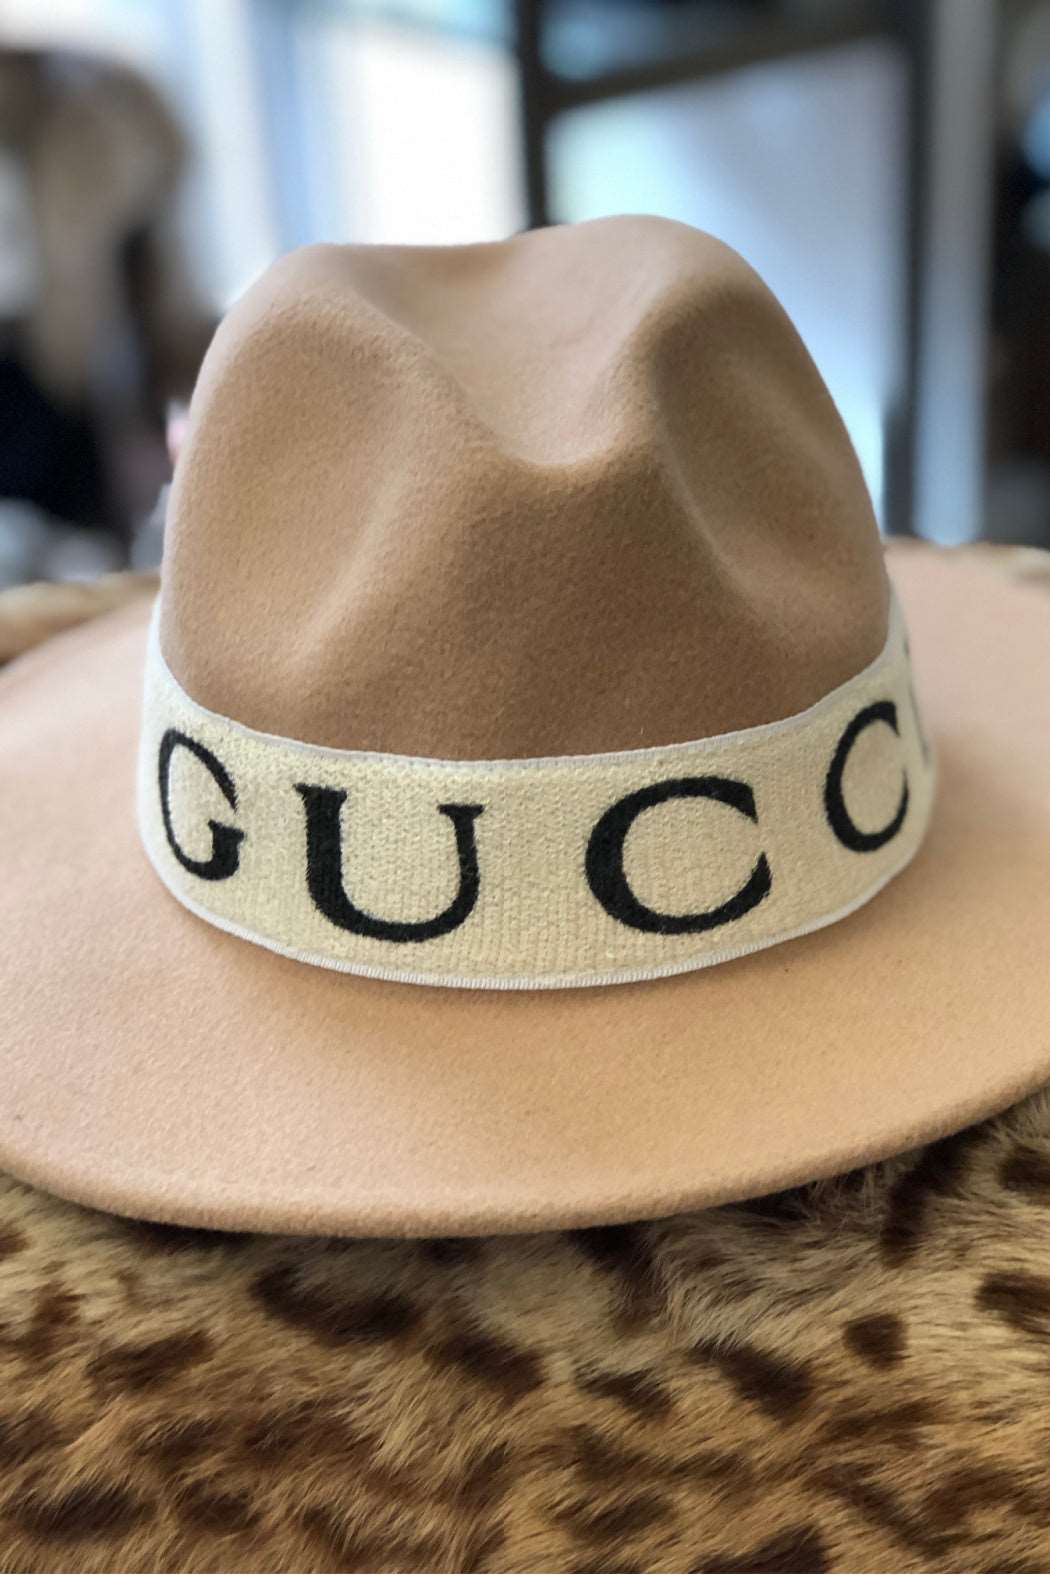 Gucci Inspired Banded Camel Fedora - Embellish Your Life 